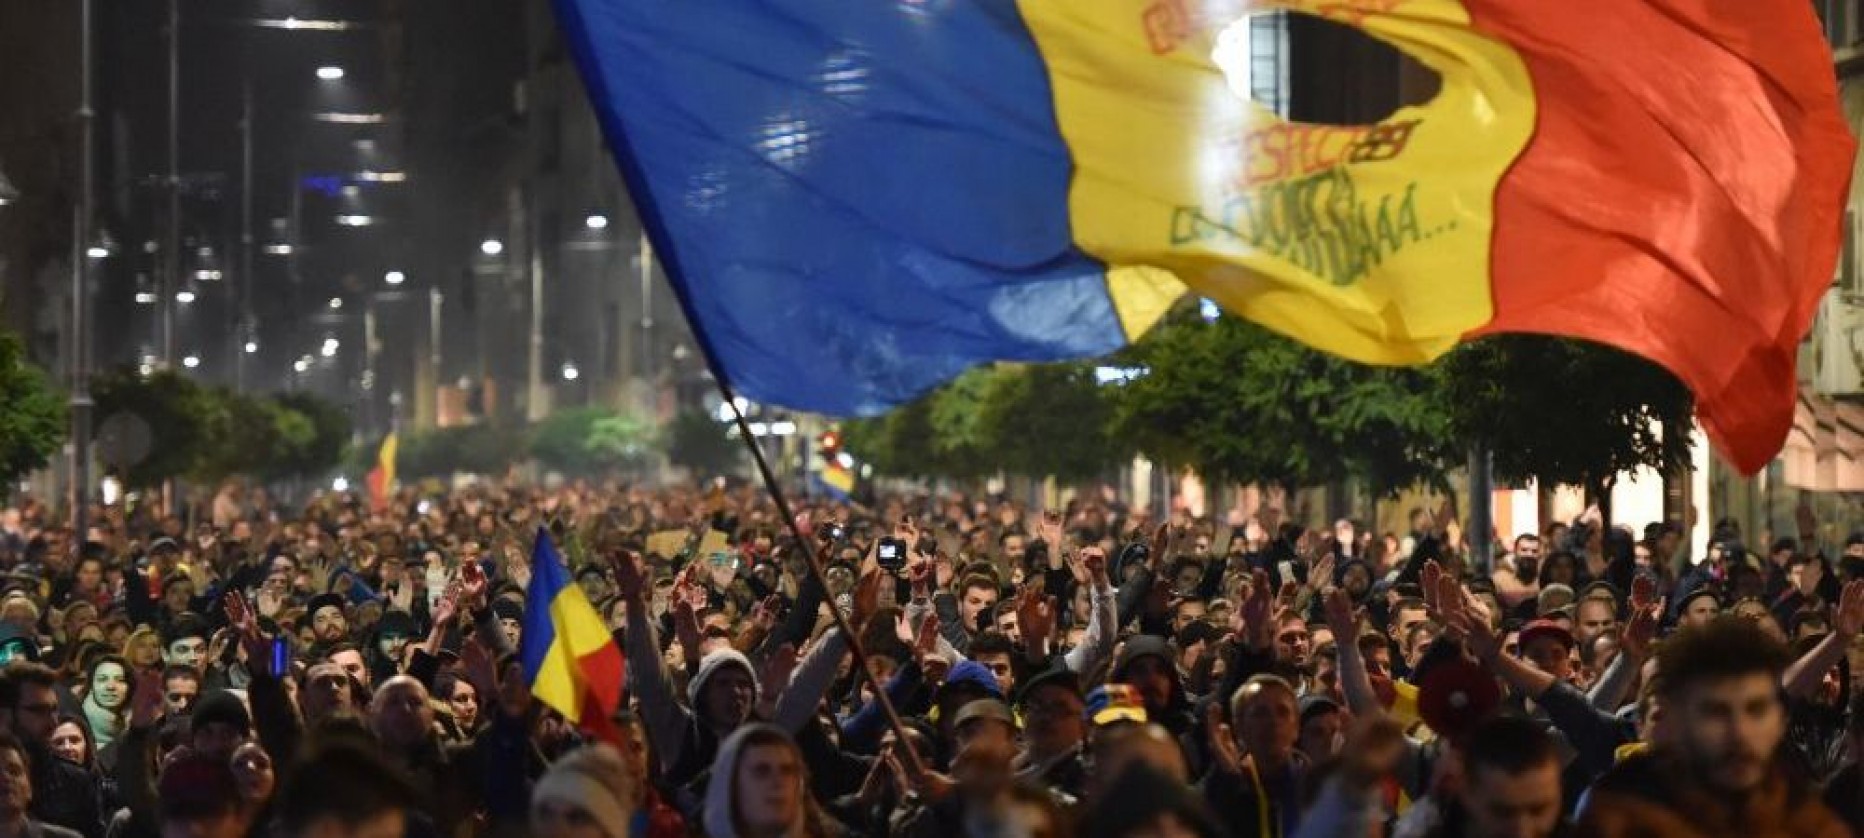 Relax, Romania will not collapse.  Don’t confuse a country with its politicians